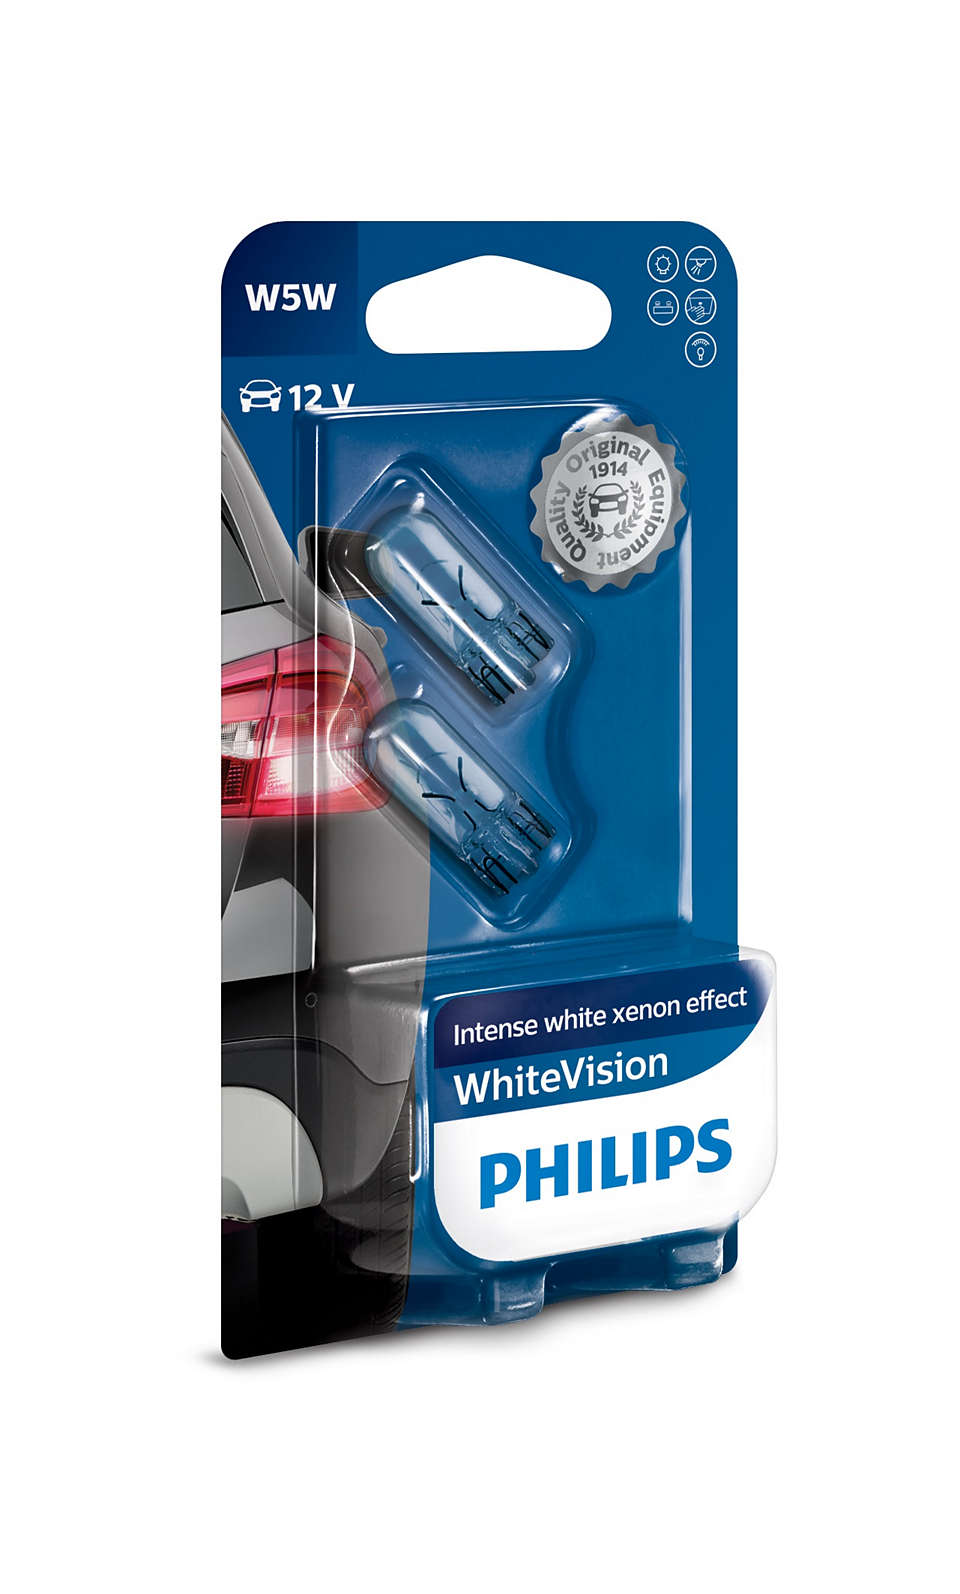 H4 PHILIPS WHITE VISION INTENSE WHITE UPGRADE WHITEVISION H4 BULBS WITH FREE W5W